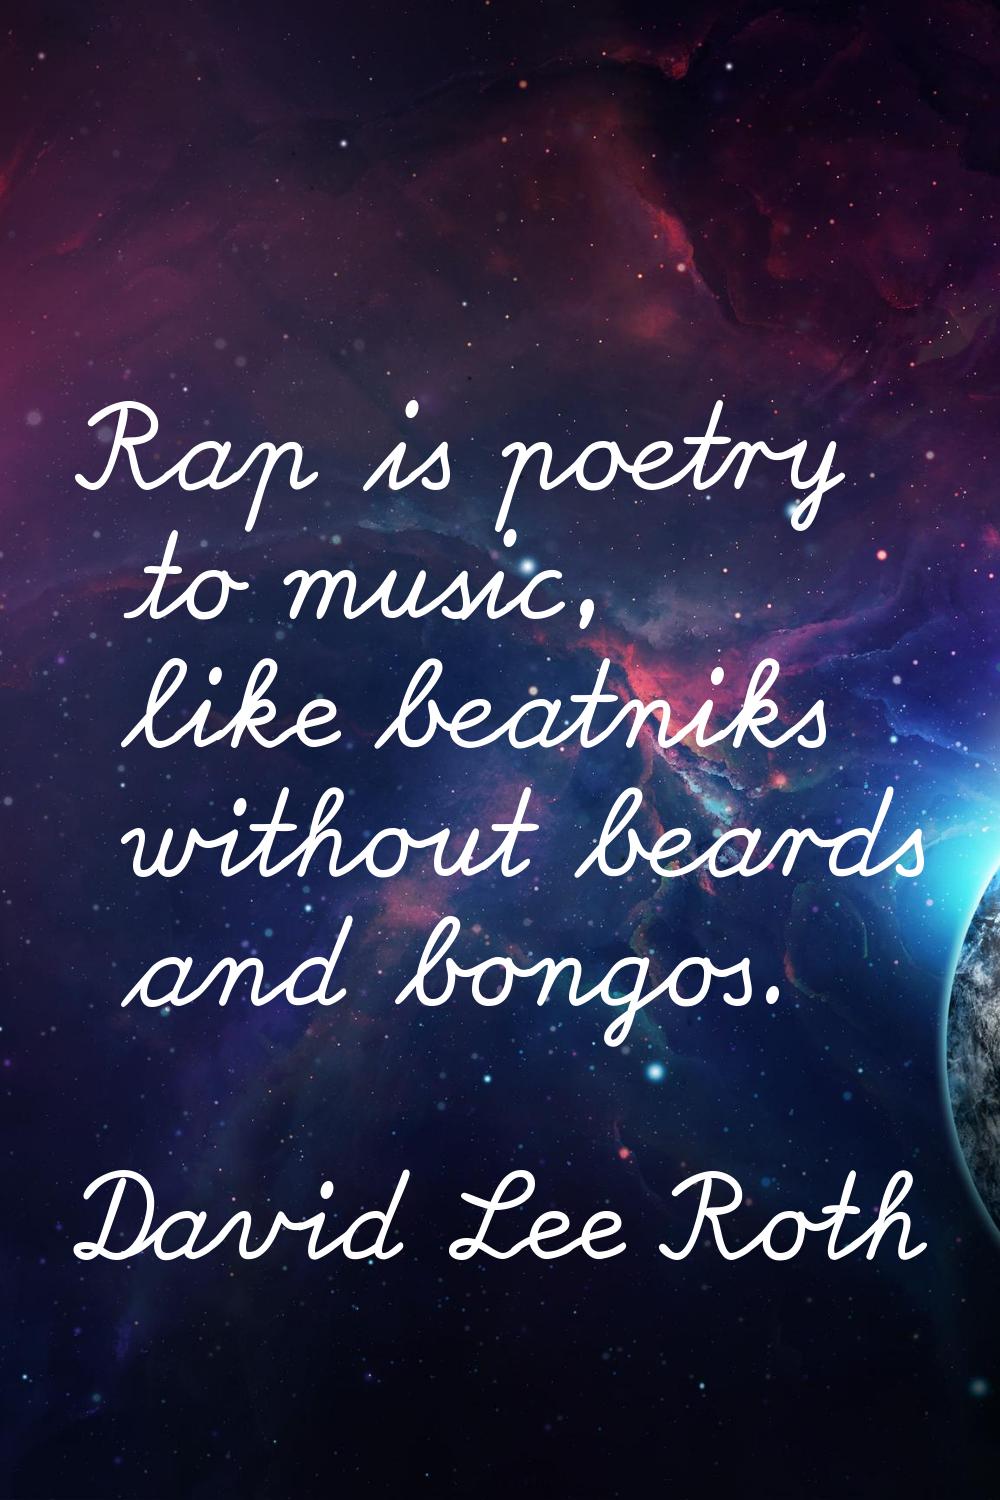 Rap is poetry to music, like beatniks without beards and bongos.